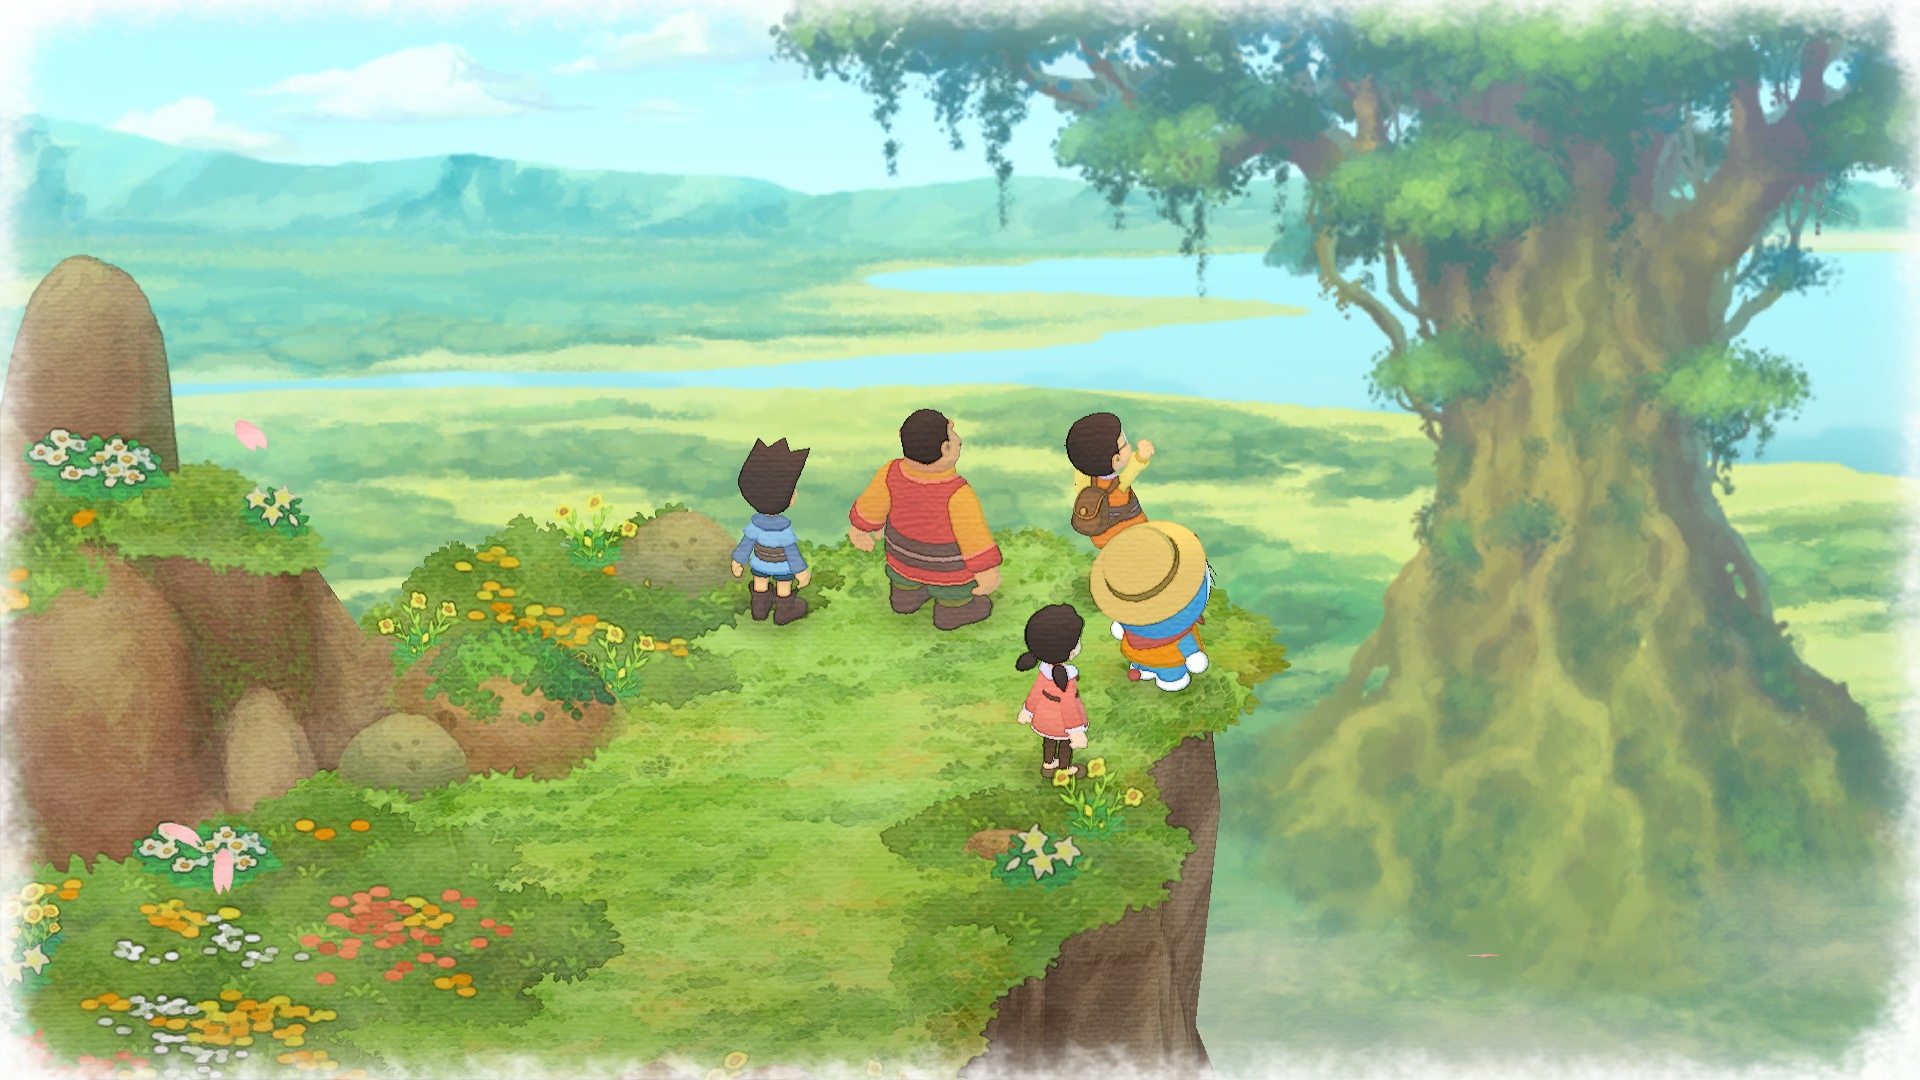 Doraemon: Story of Seasons announced for Steam and Nintendo Switch - First Screenshots and Trailer